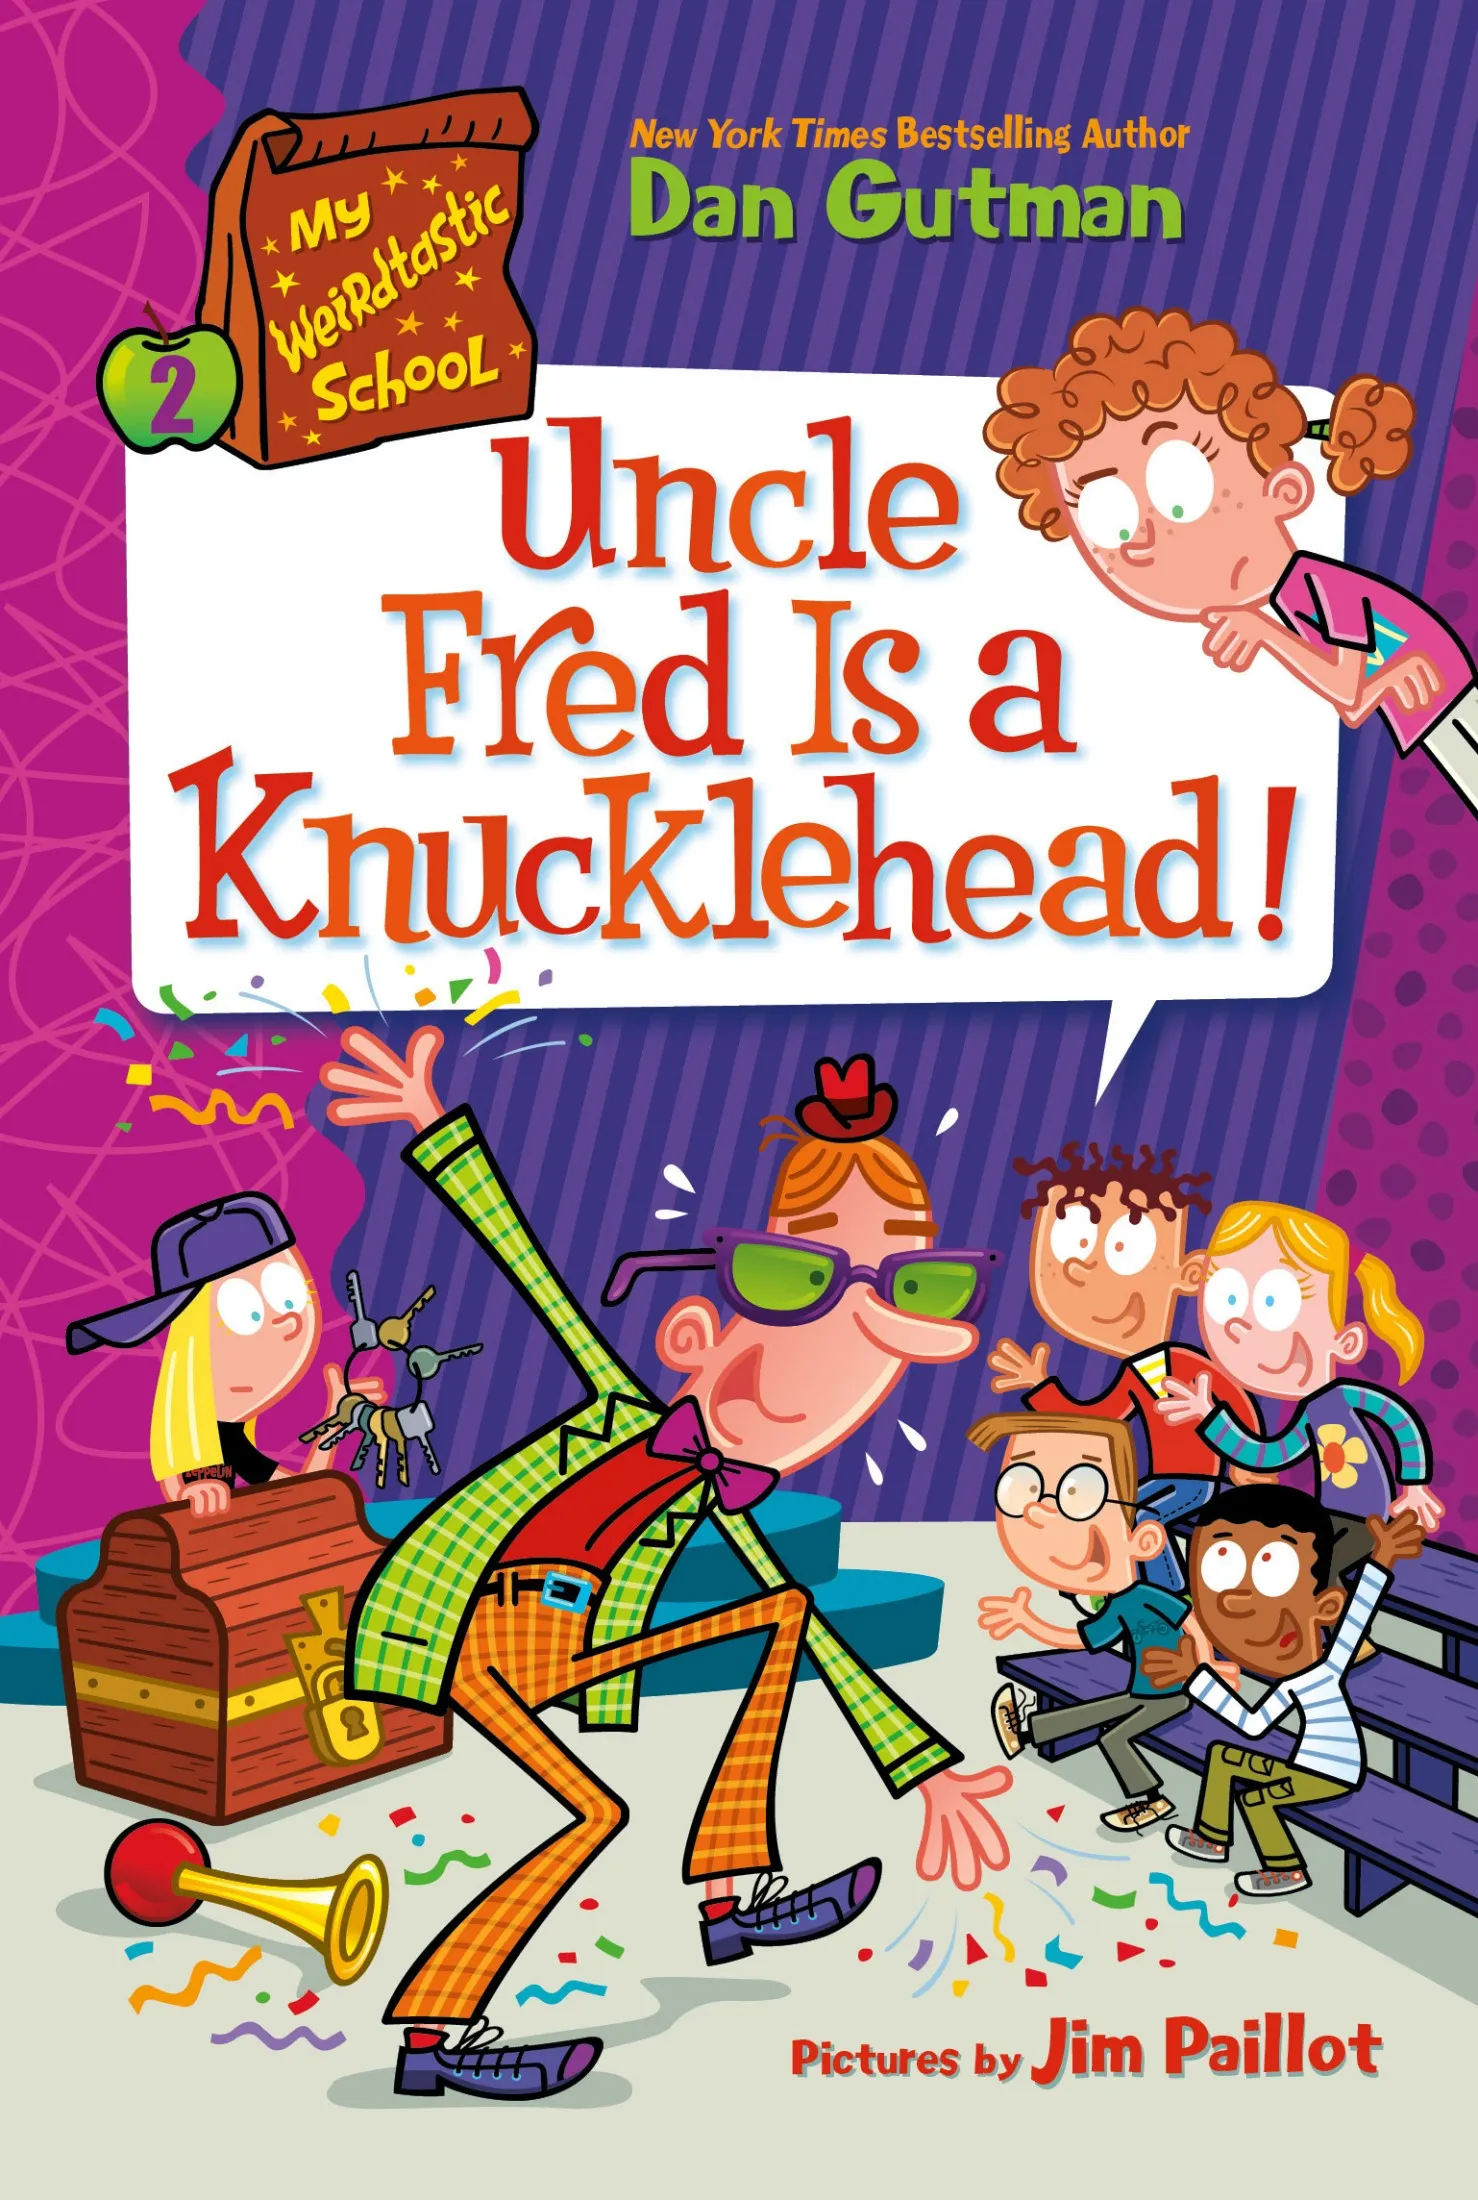 Uncle Fred Is a Knucklehead! (My Weirdtastic School #2)